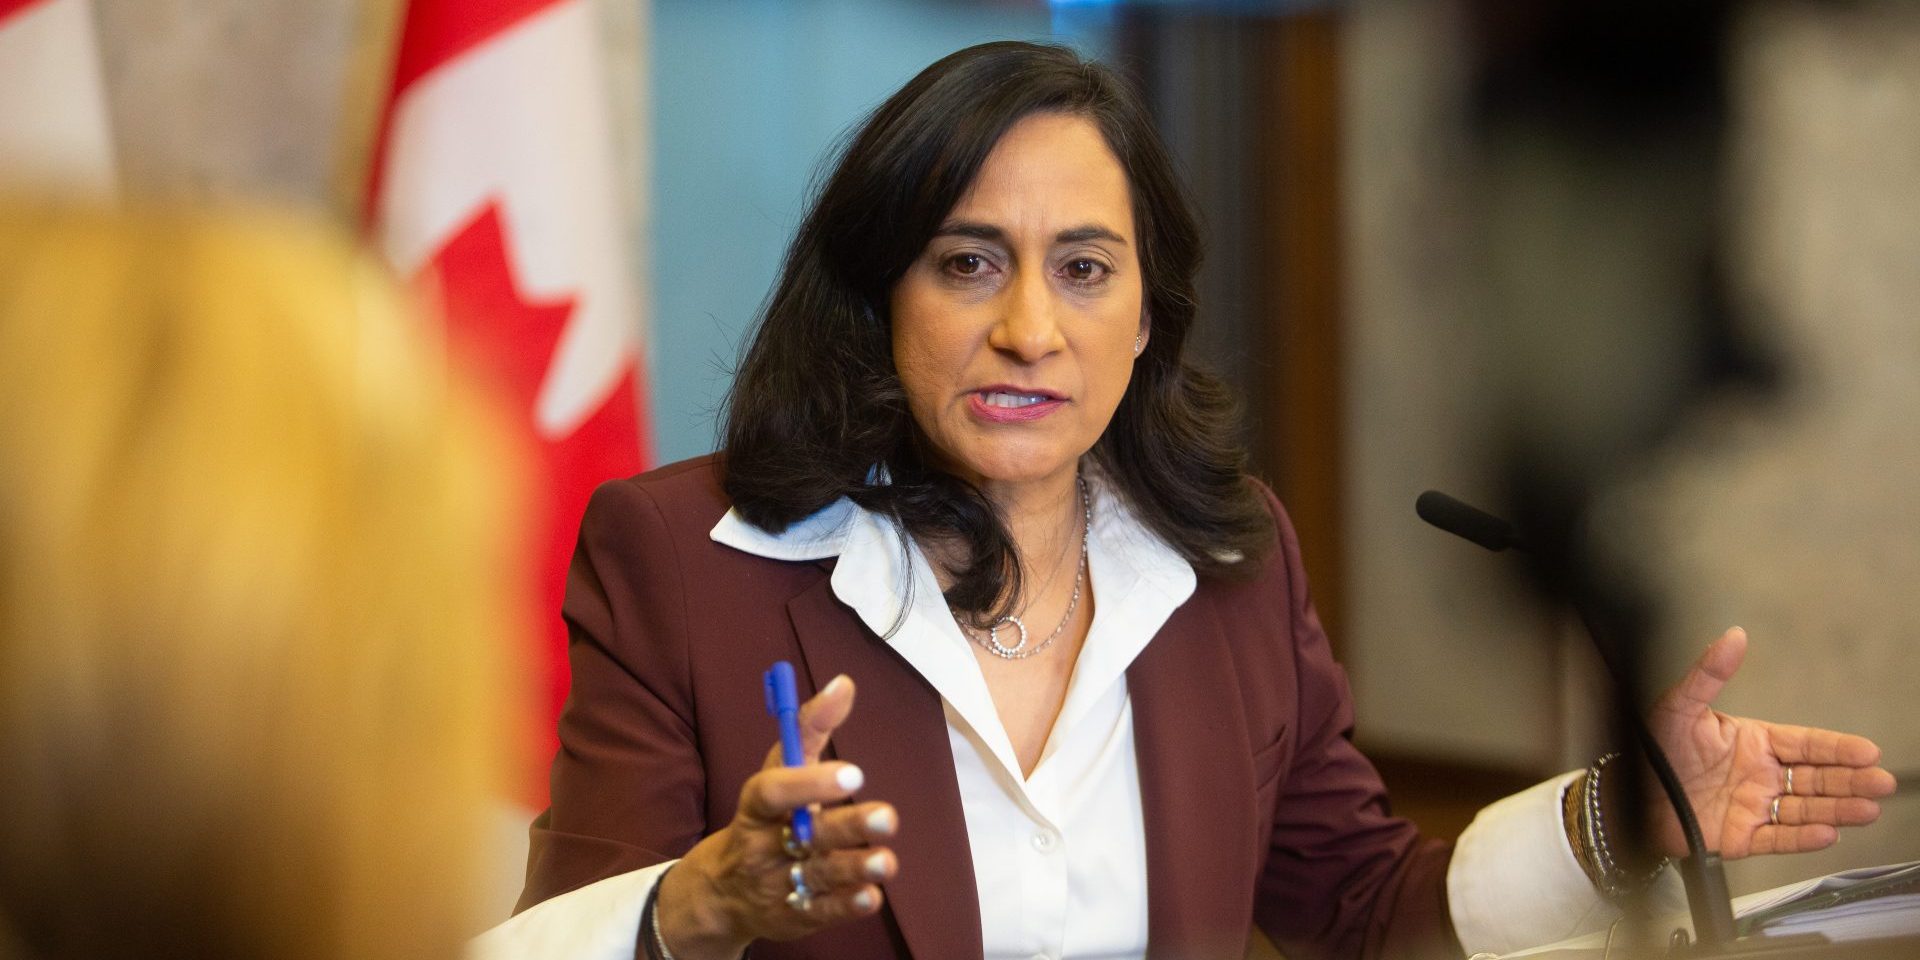 Minister of National Defence Anita Anand holds a press conference in West Block  on  Dec. 13, 2022, to speak about the presentation of a report to Parliament on Culture Change Reforms in Response to Former Supreme Court Justice Arbour’s Recommendations. The Hill Times photograph by Andrew Meade